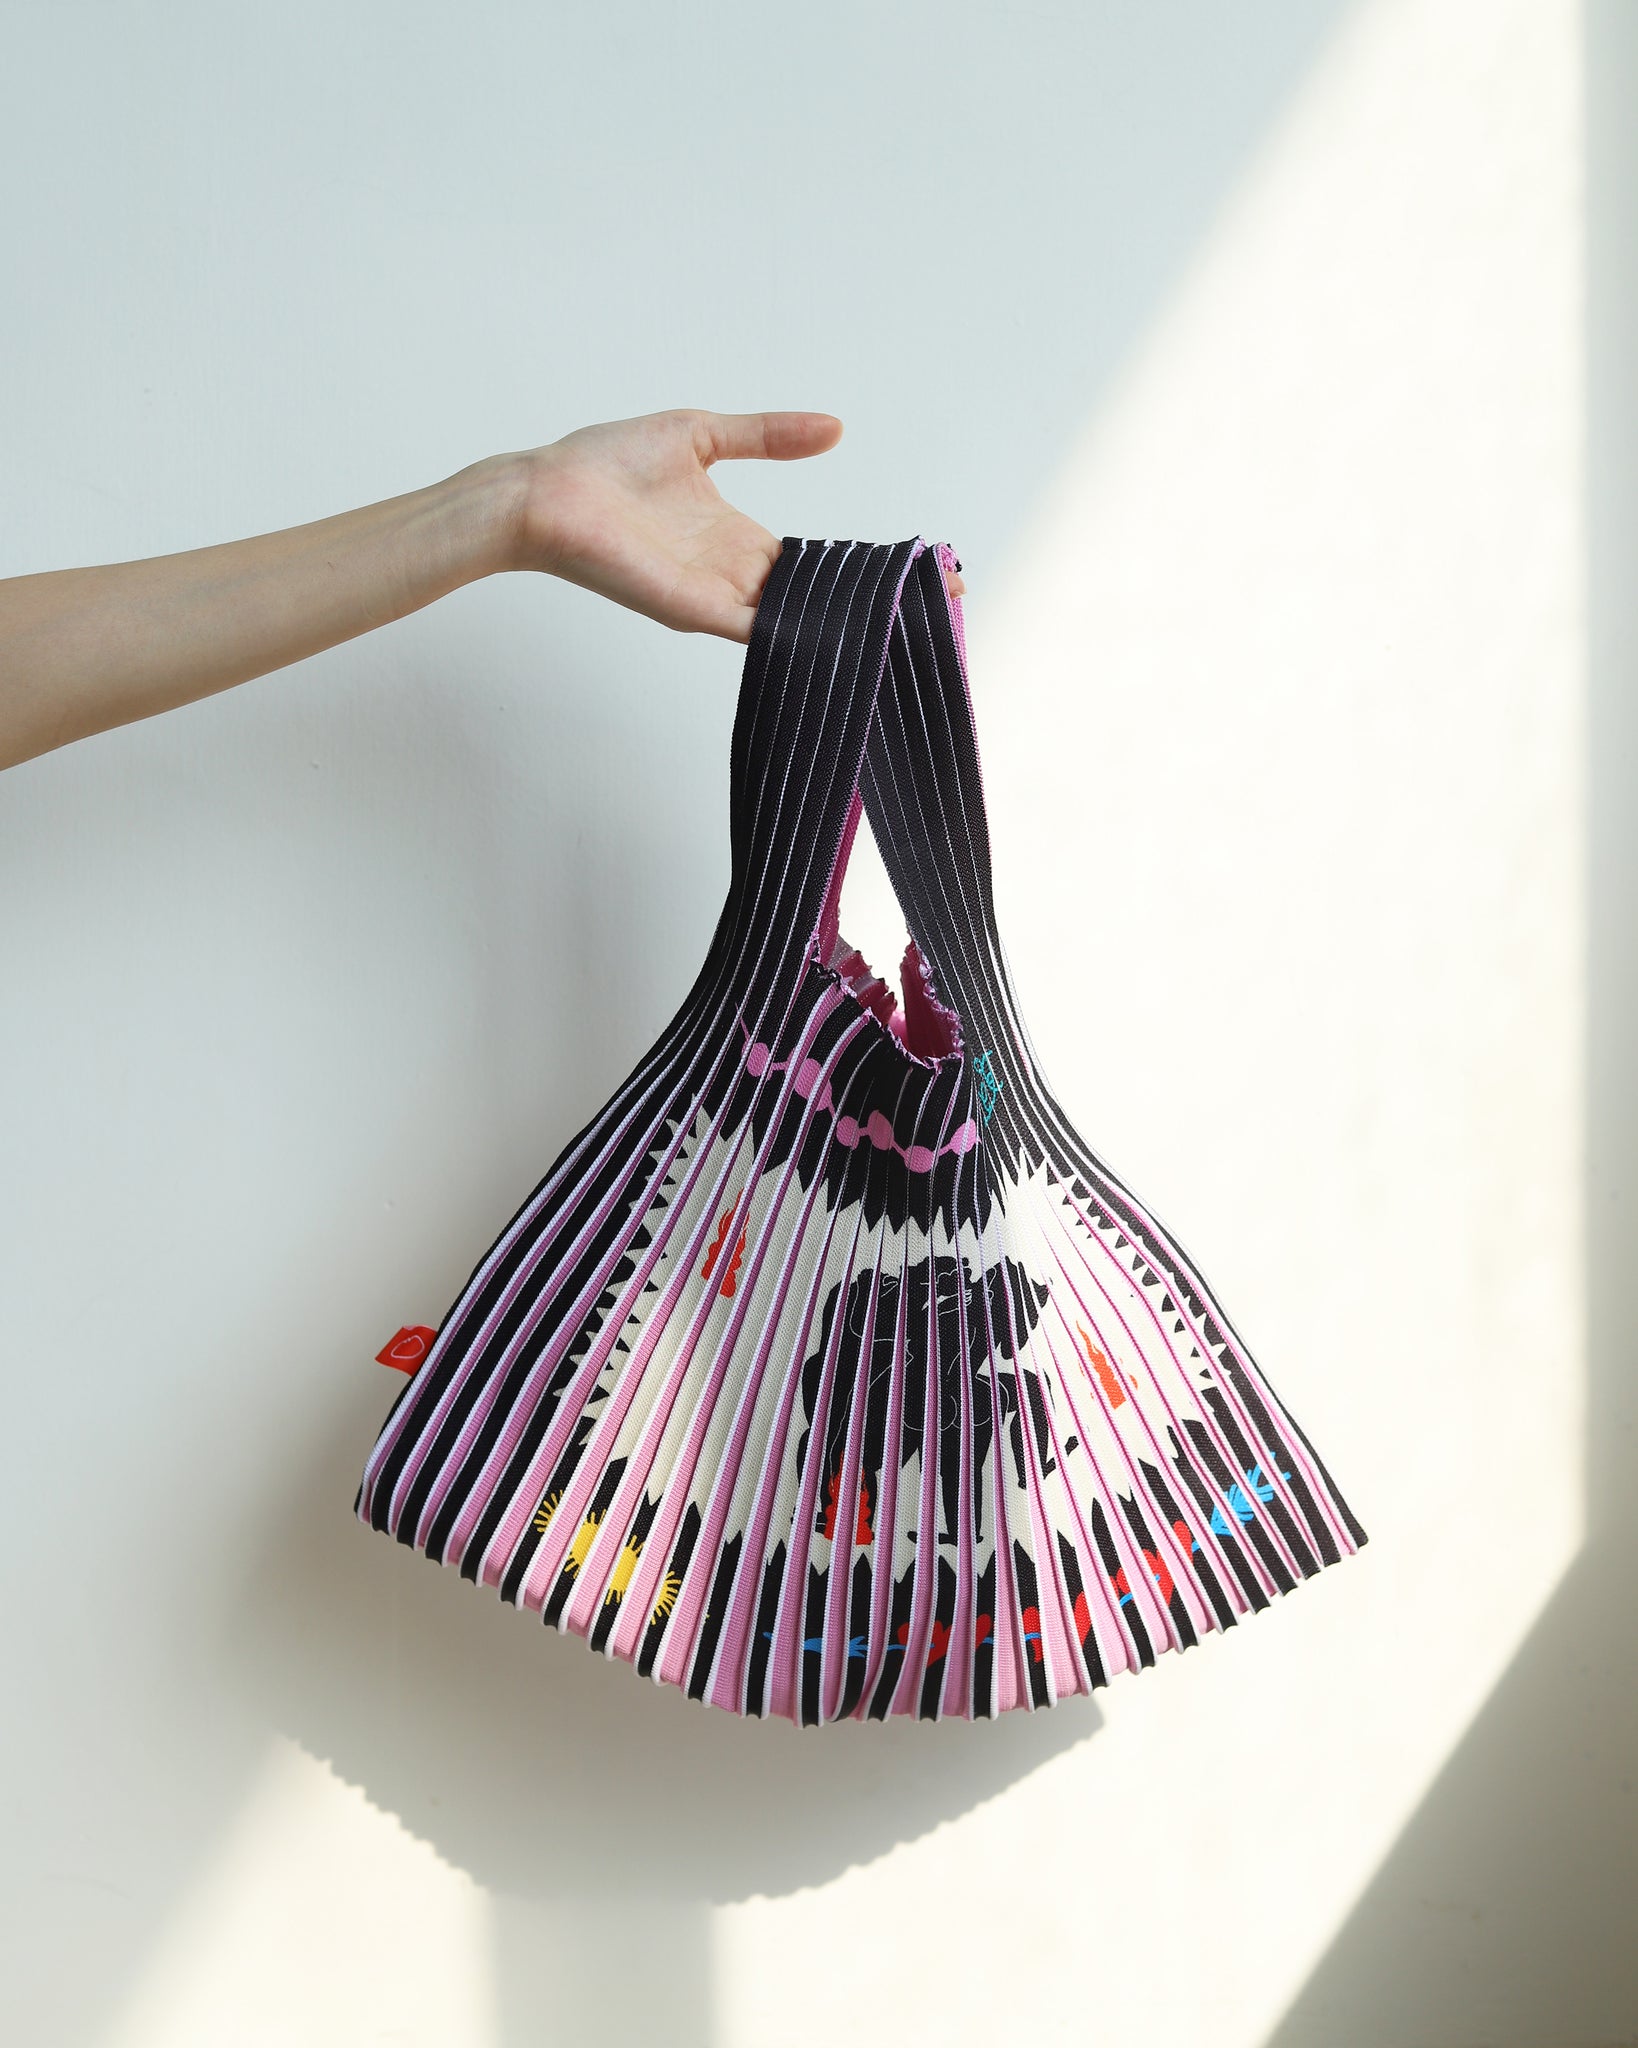 Knit Bag - Collaboration with PEI CHI LEE - 22002